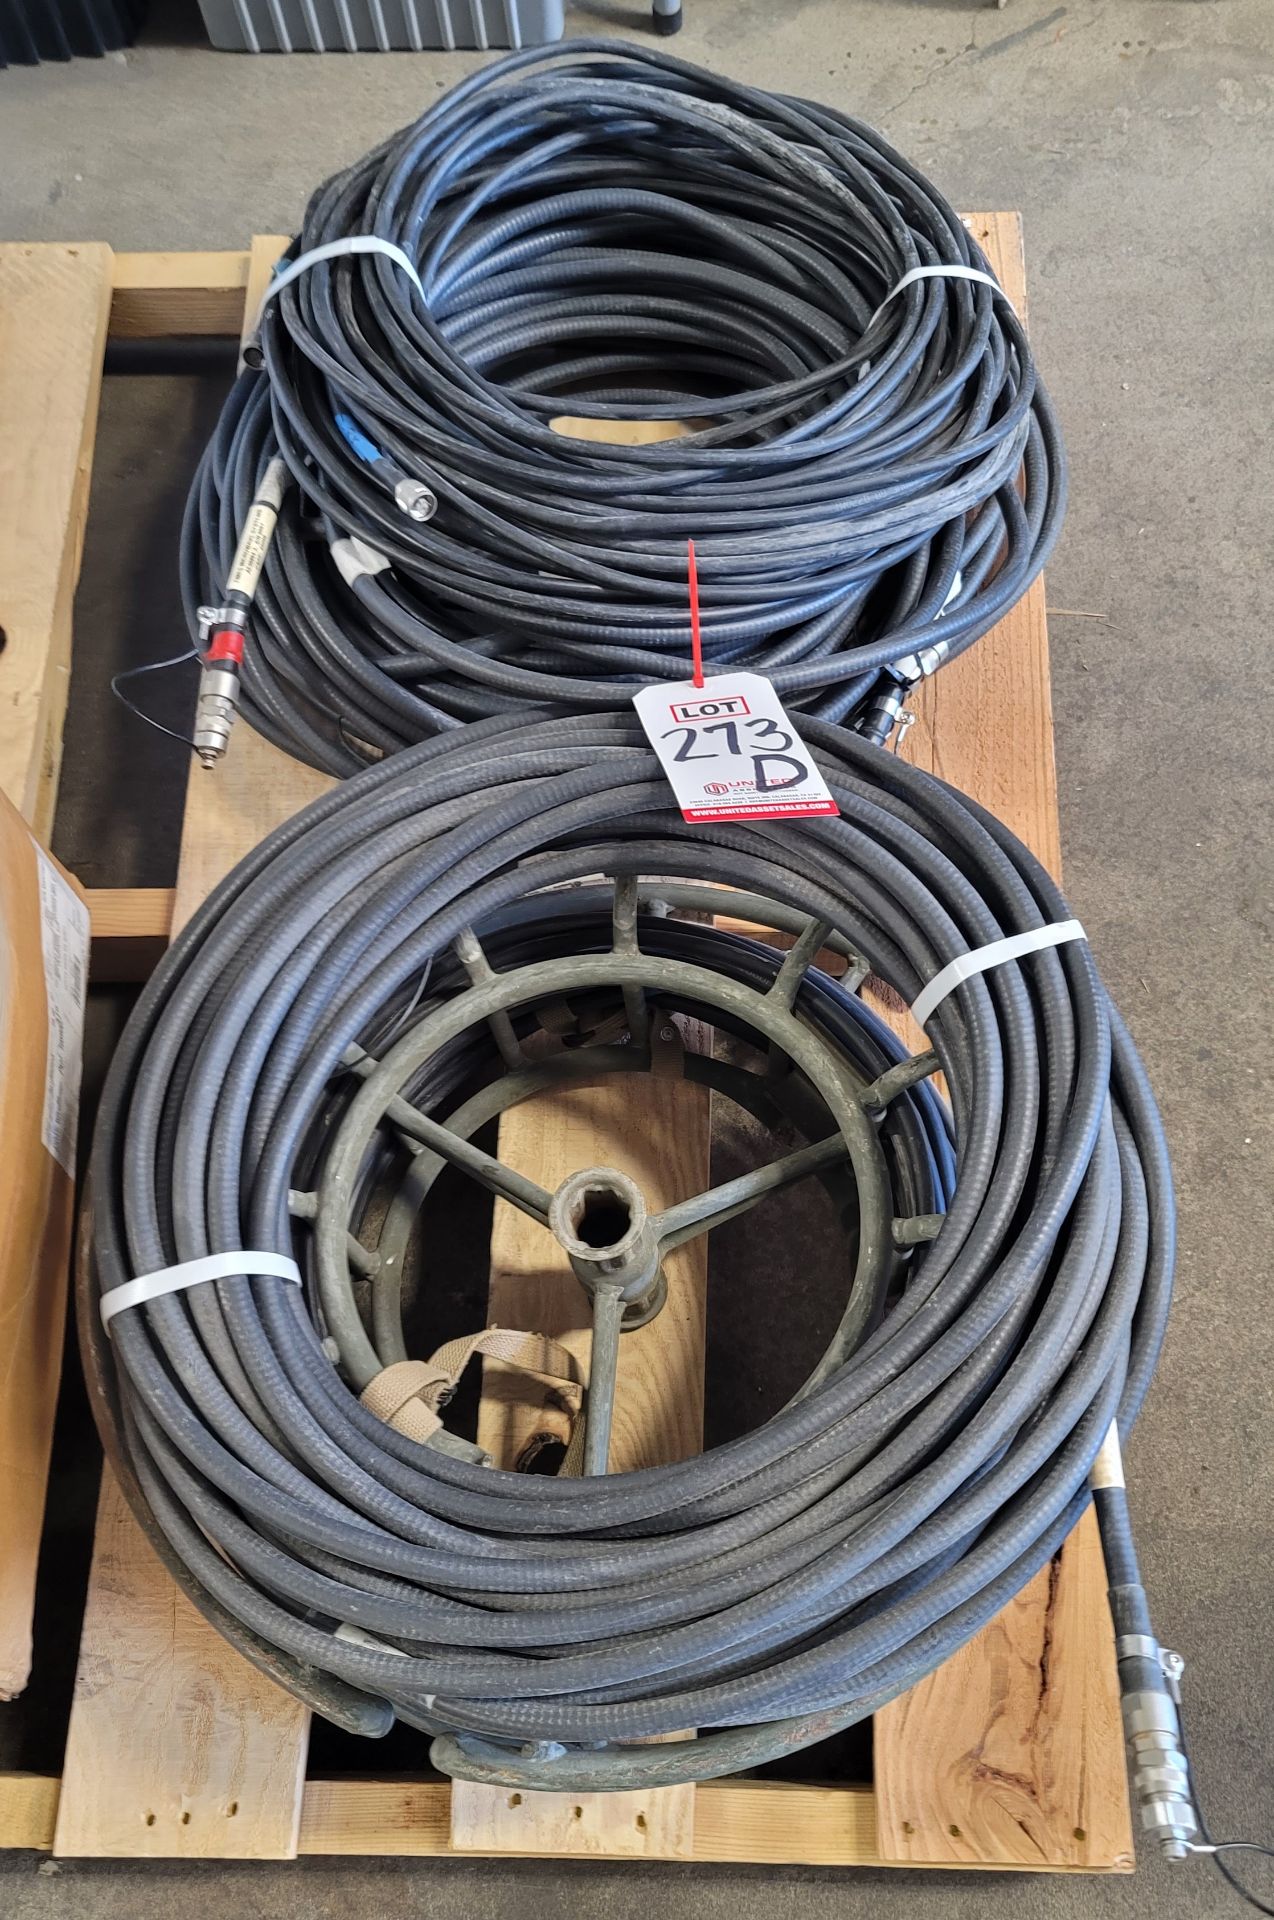 LOT - CO-AX CABLE, AS PICTURED